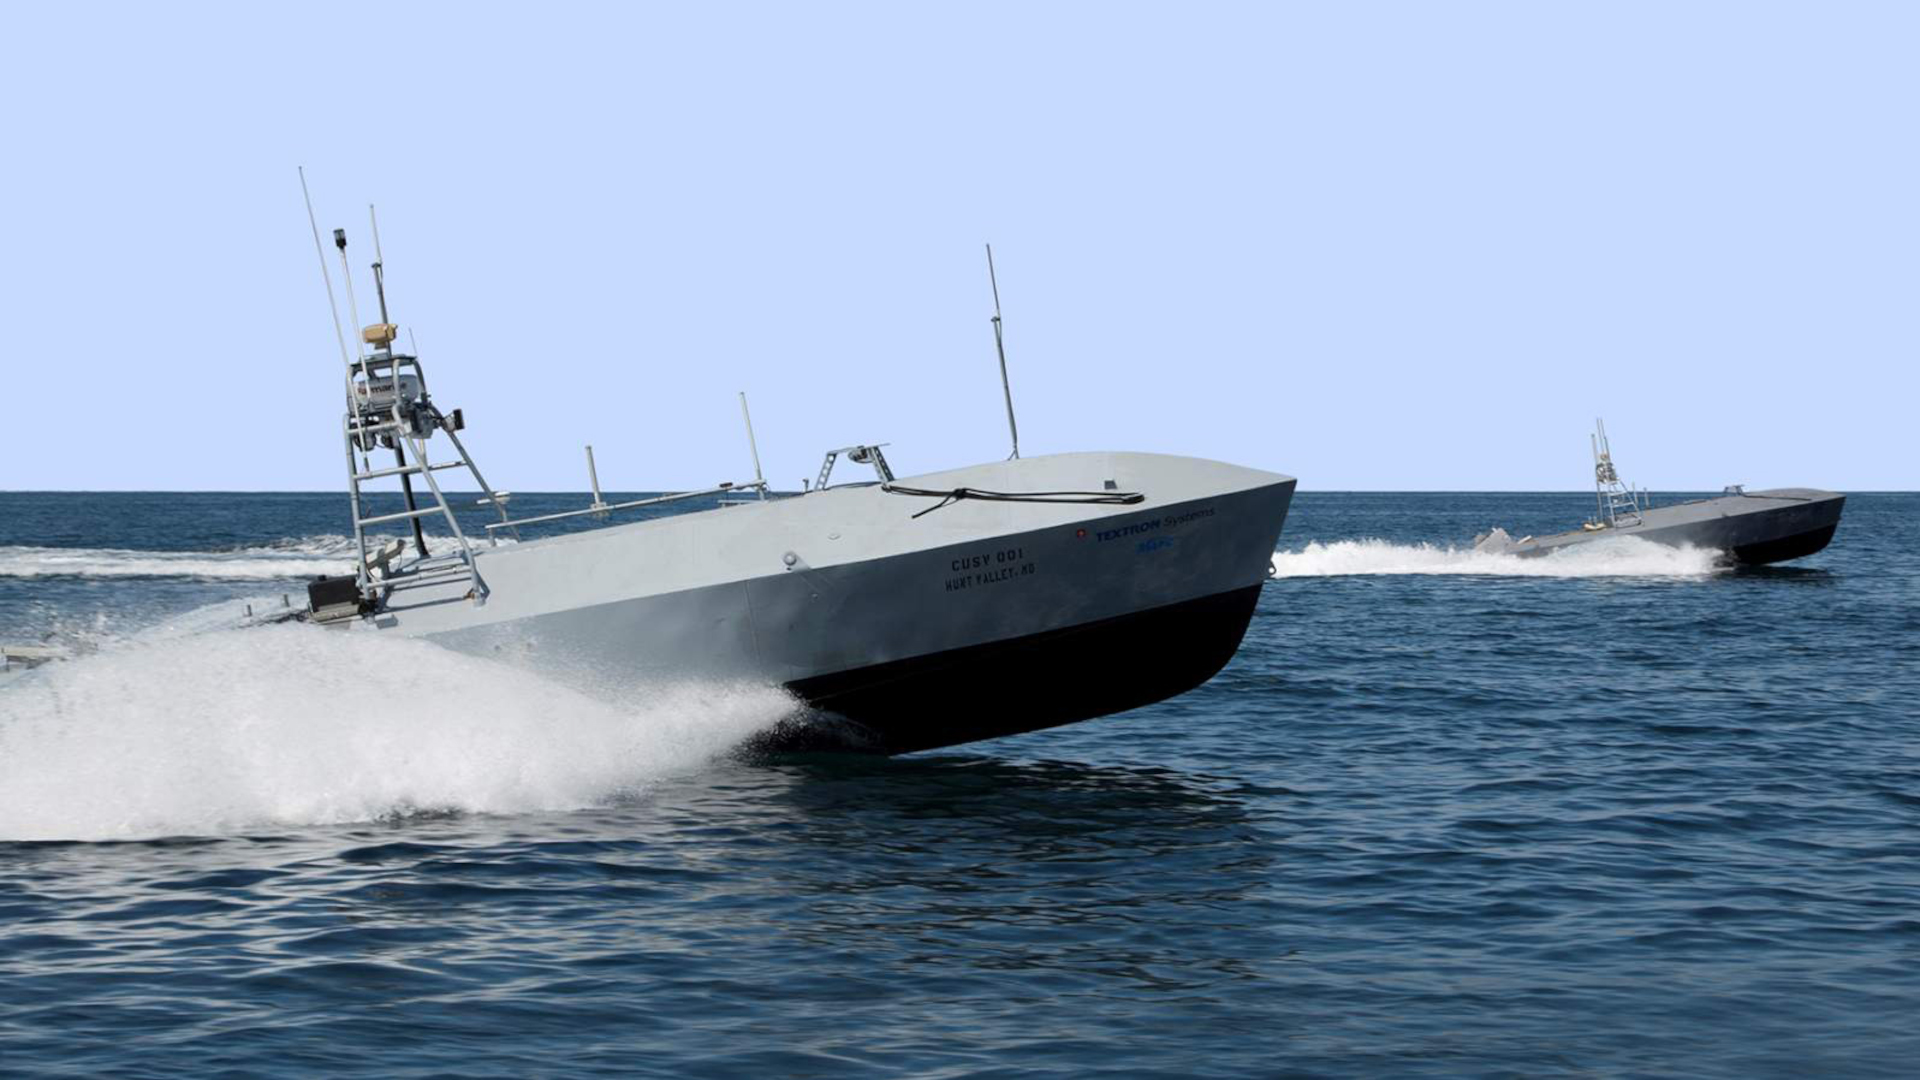 The Defense Innovation Unit has put out a call for proposals for low-cost &quot;interceptor&quot; drone boats that can operate in swarms to at least find and shadow targets of interest at sea.